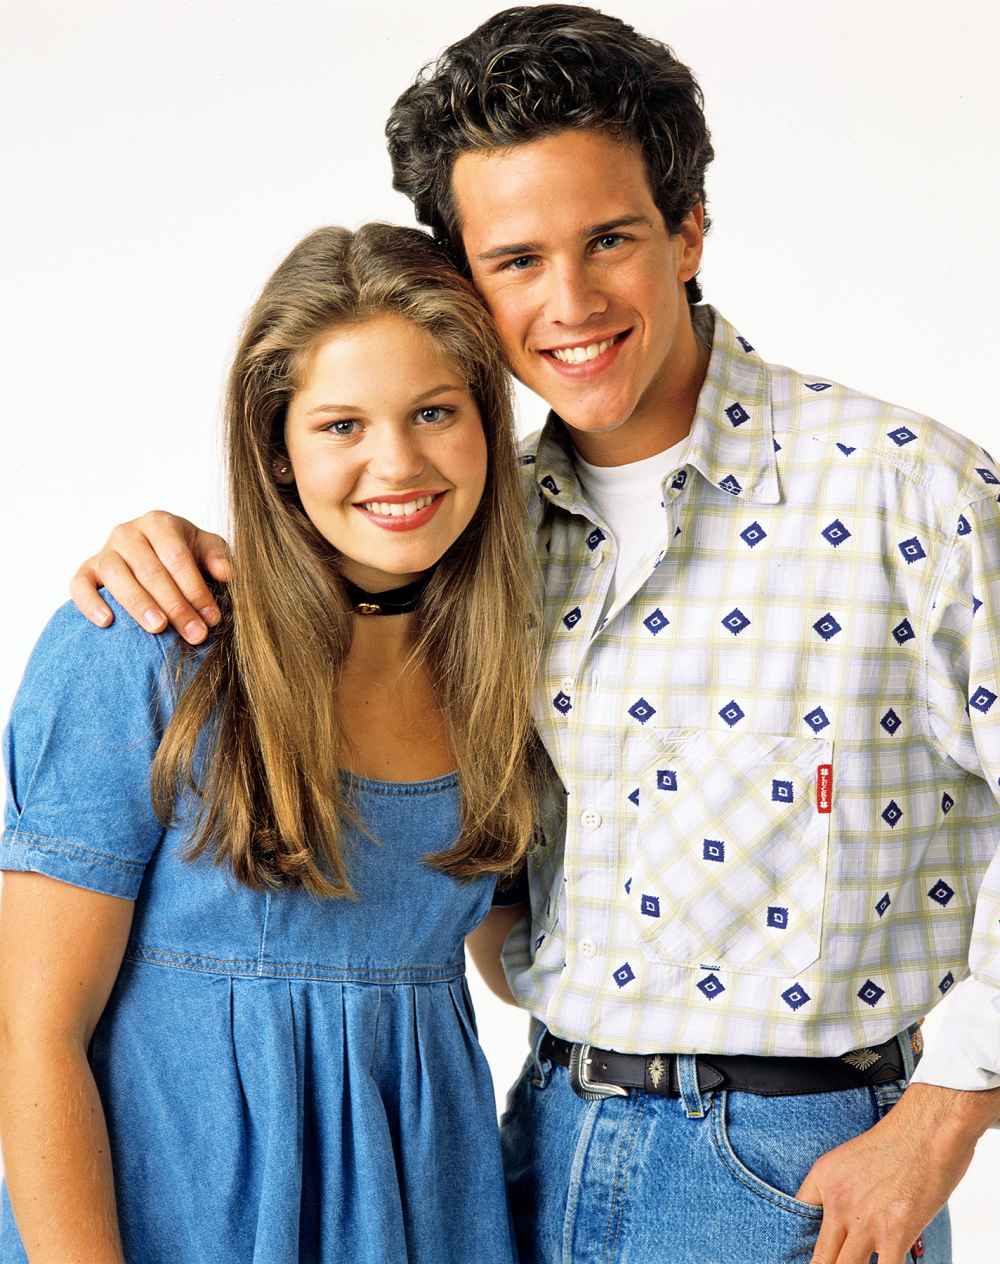 Candace Cameron Bure and Scott Weinger